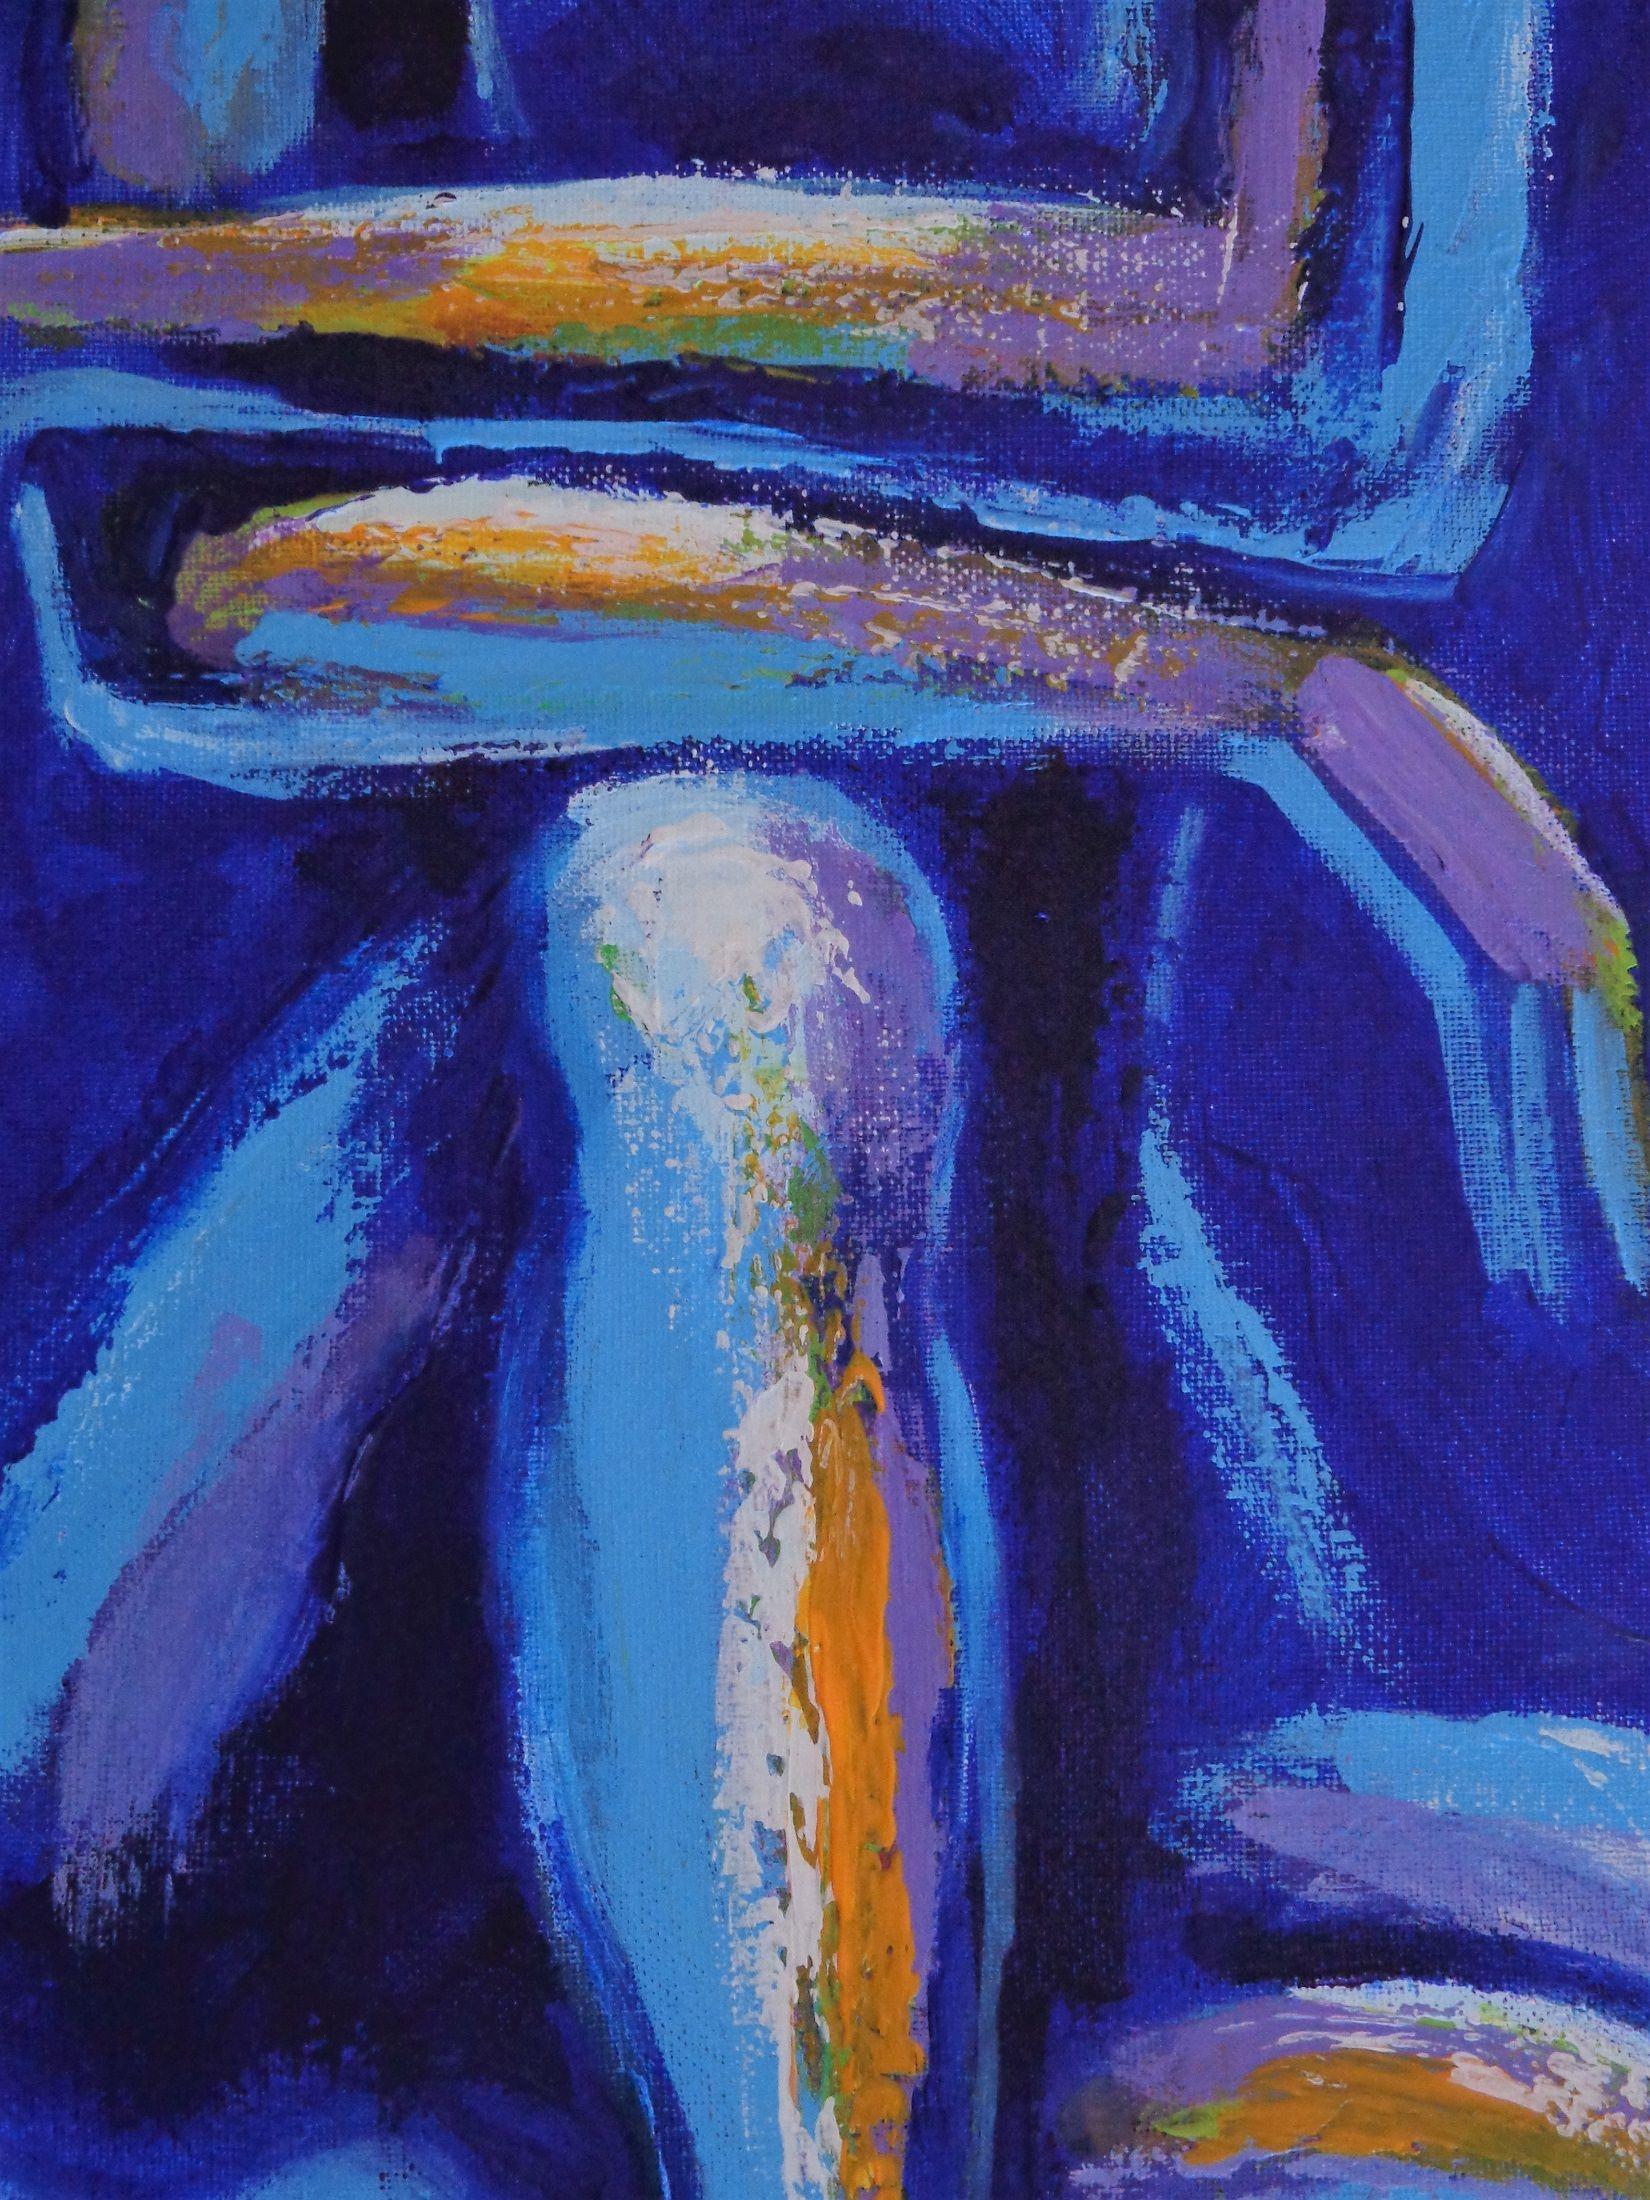 Original contemporary figurative acrylics painting on canvas, painted edges and ready to hang. Frame is optional. Colourful and textured painting made with layers of blue, purple, teal and orange acrylics applied with the palette knife. Part of a